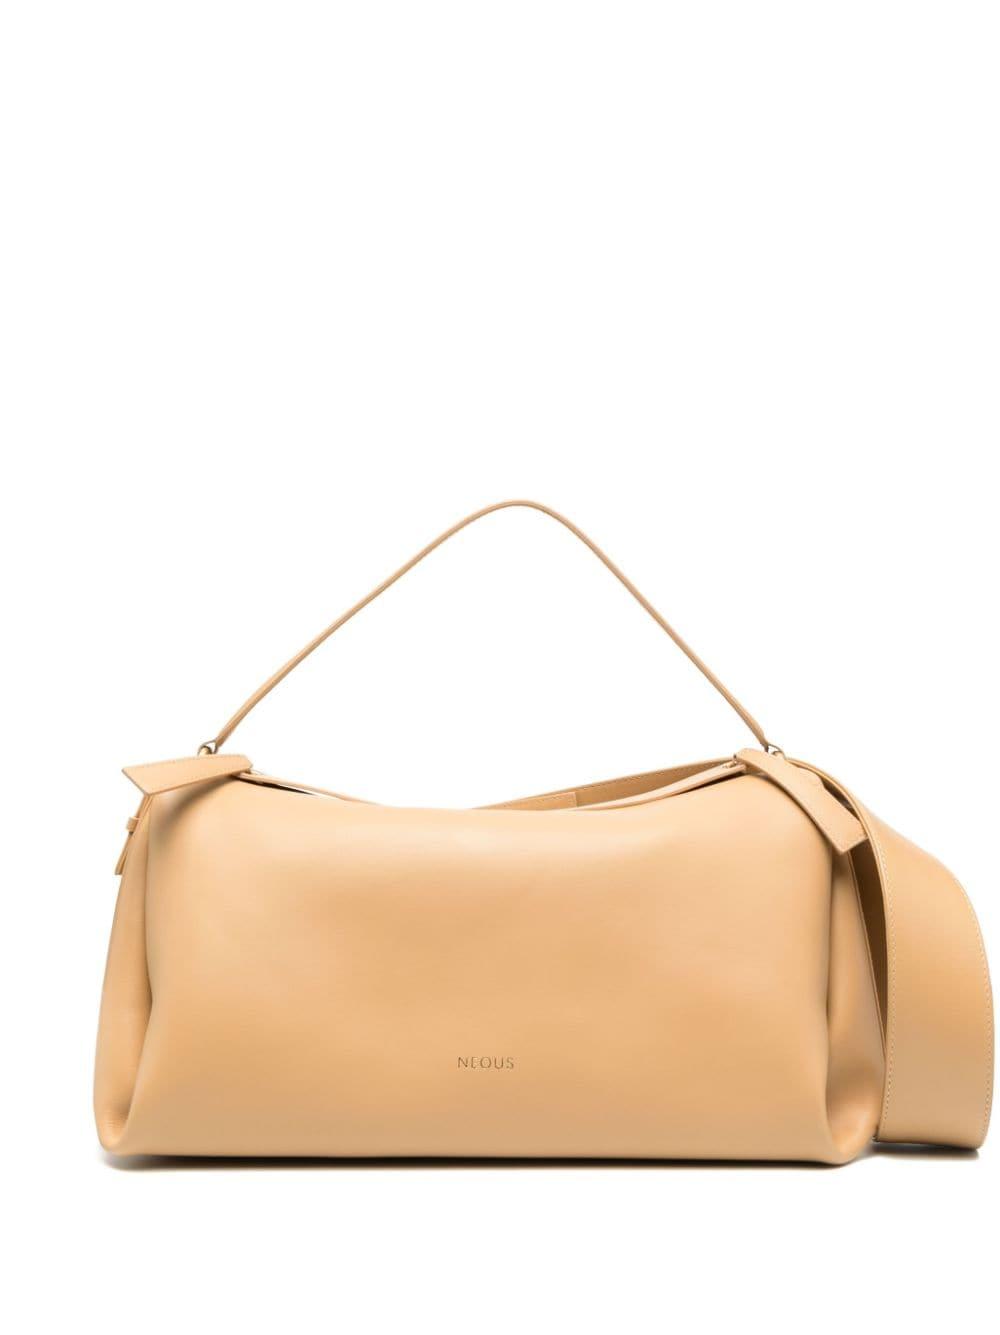 Neous Scorpius Leather Tote Bag in Natural | Lyst